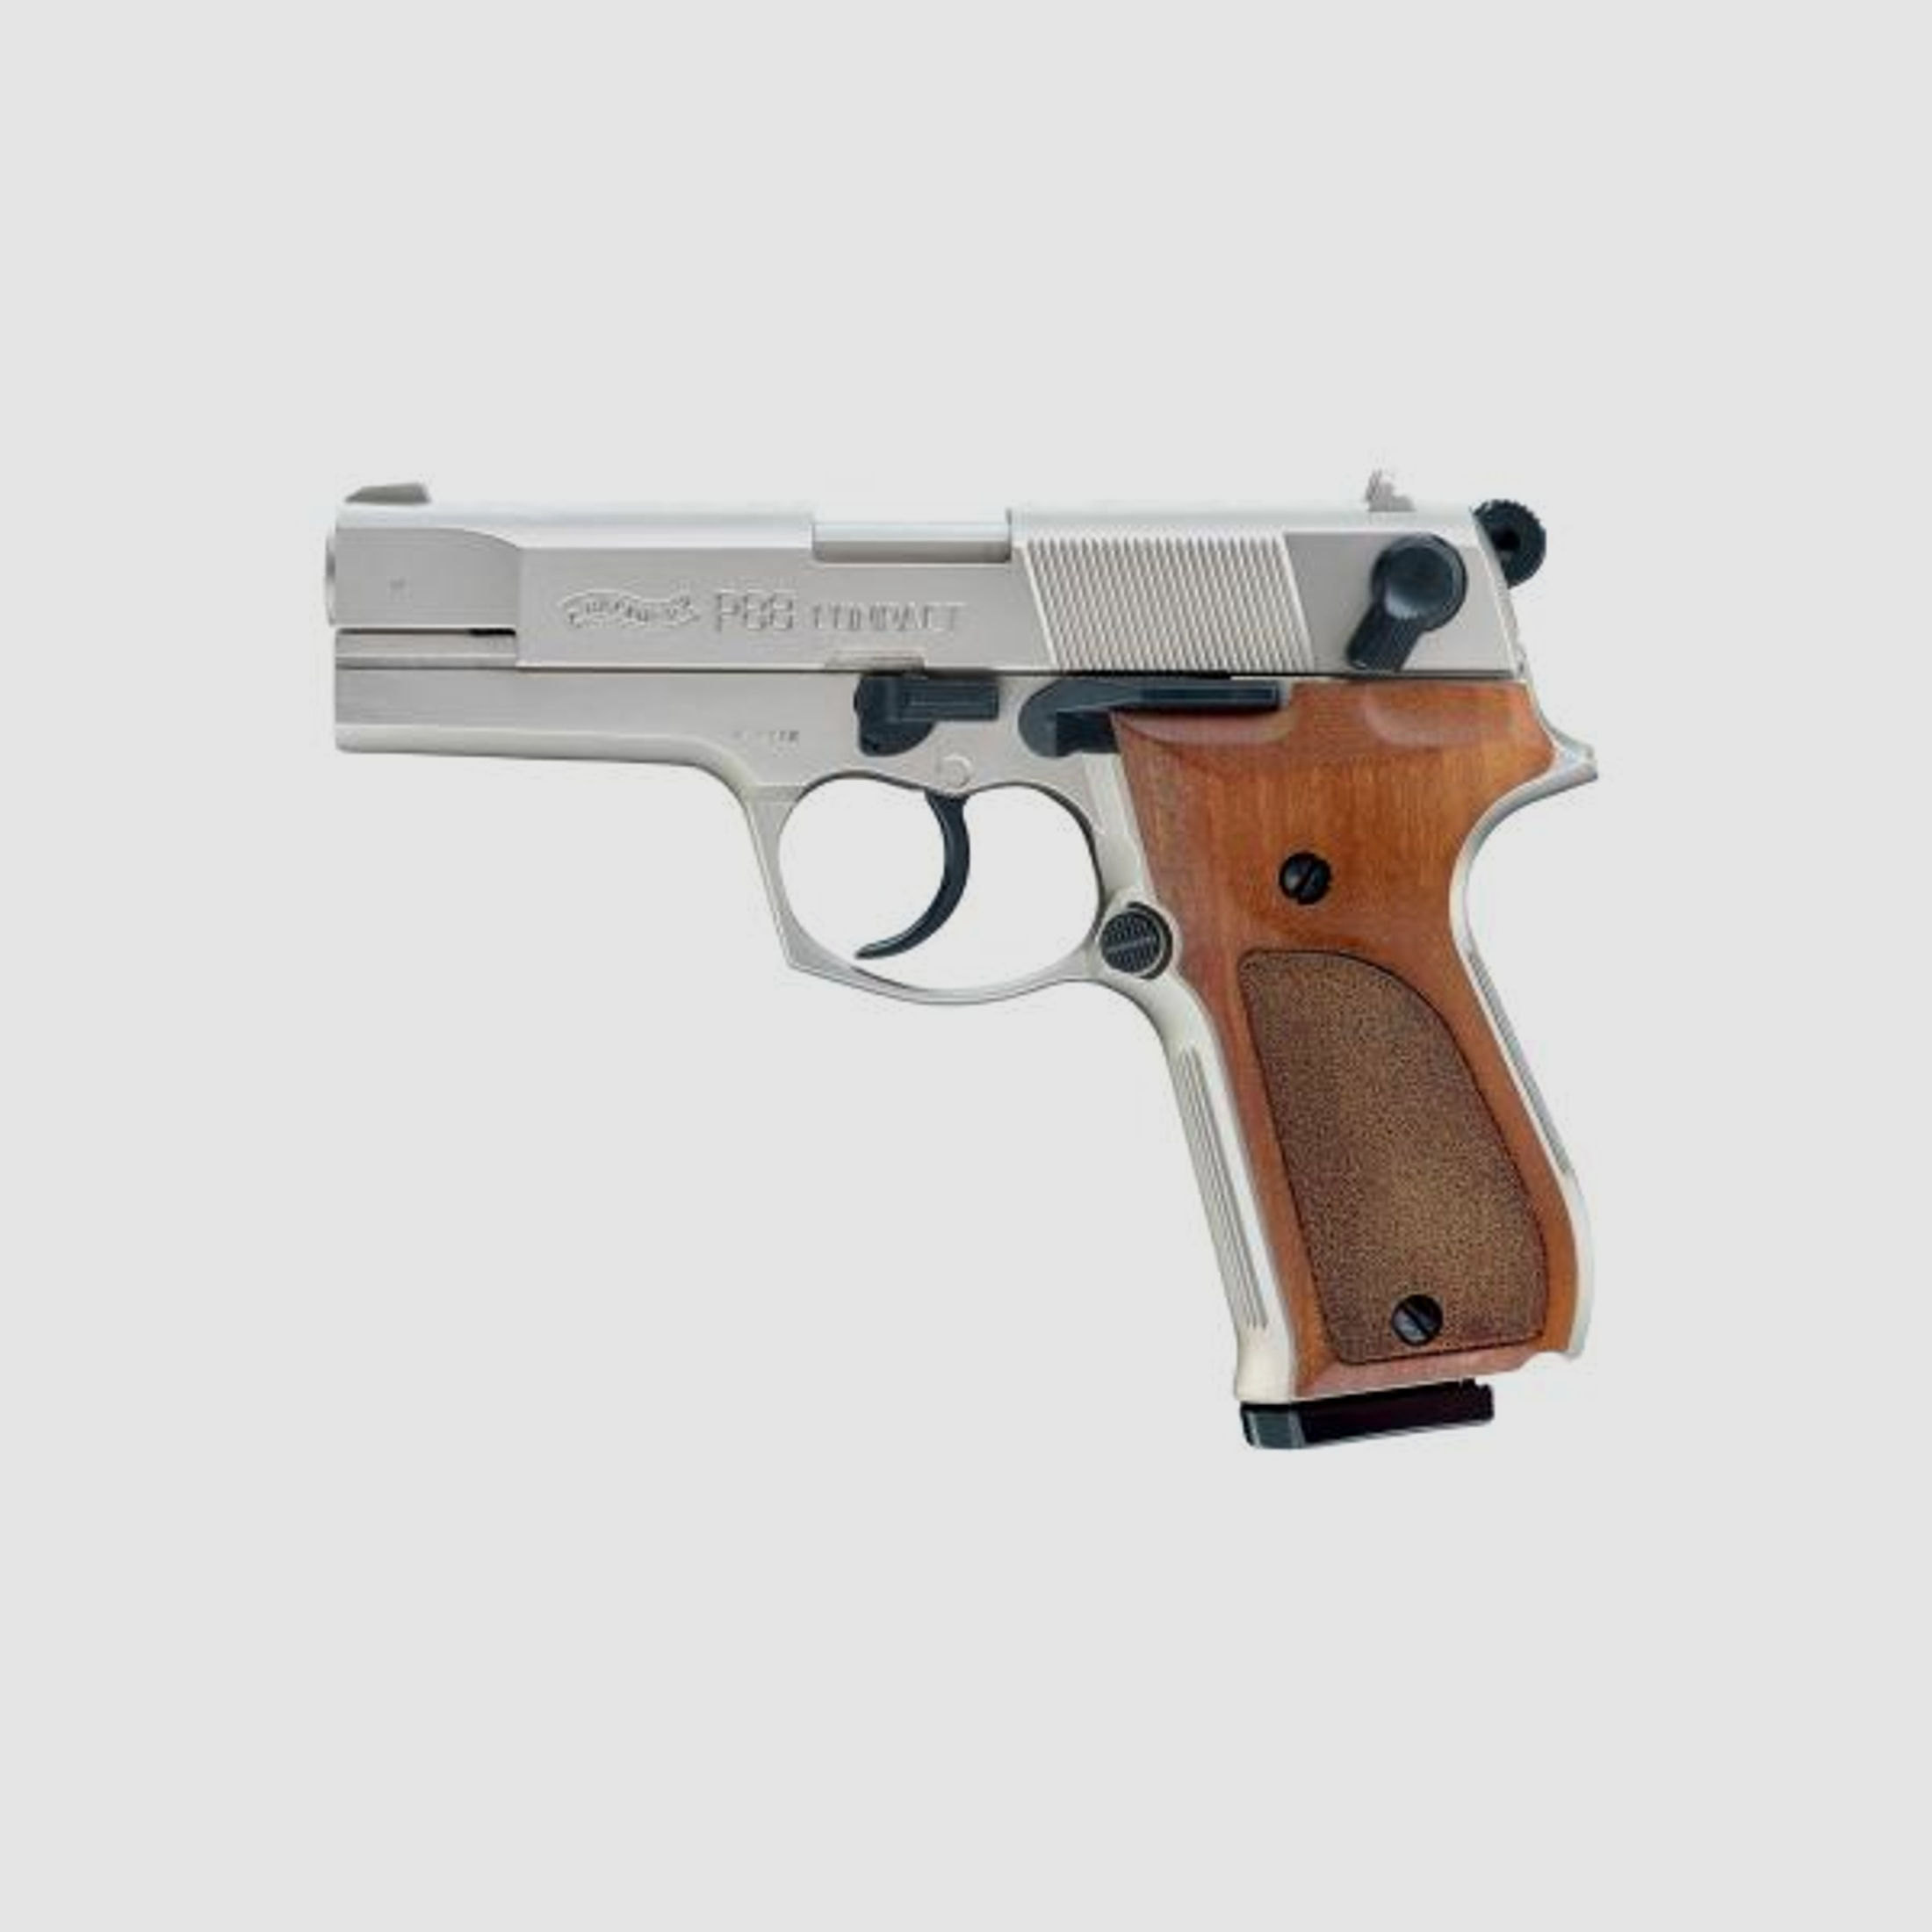 WALTHER Gaspistole (SRS) P88 Nickel Kal. 9mm P.A. Holzgriff